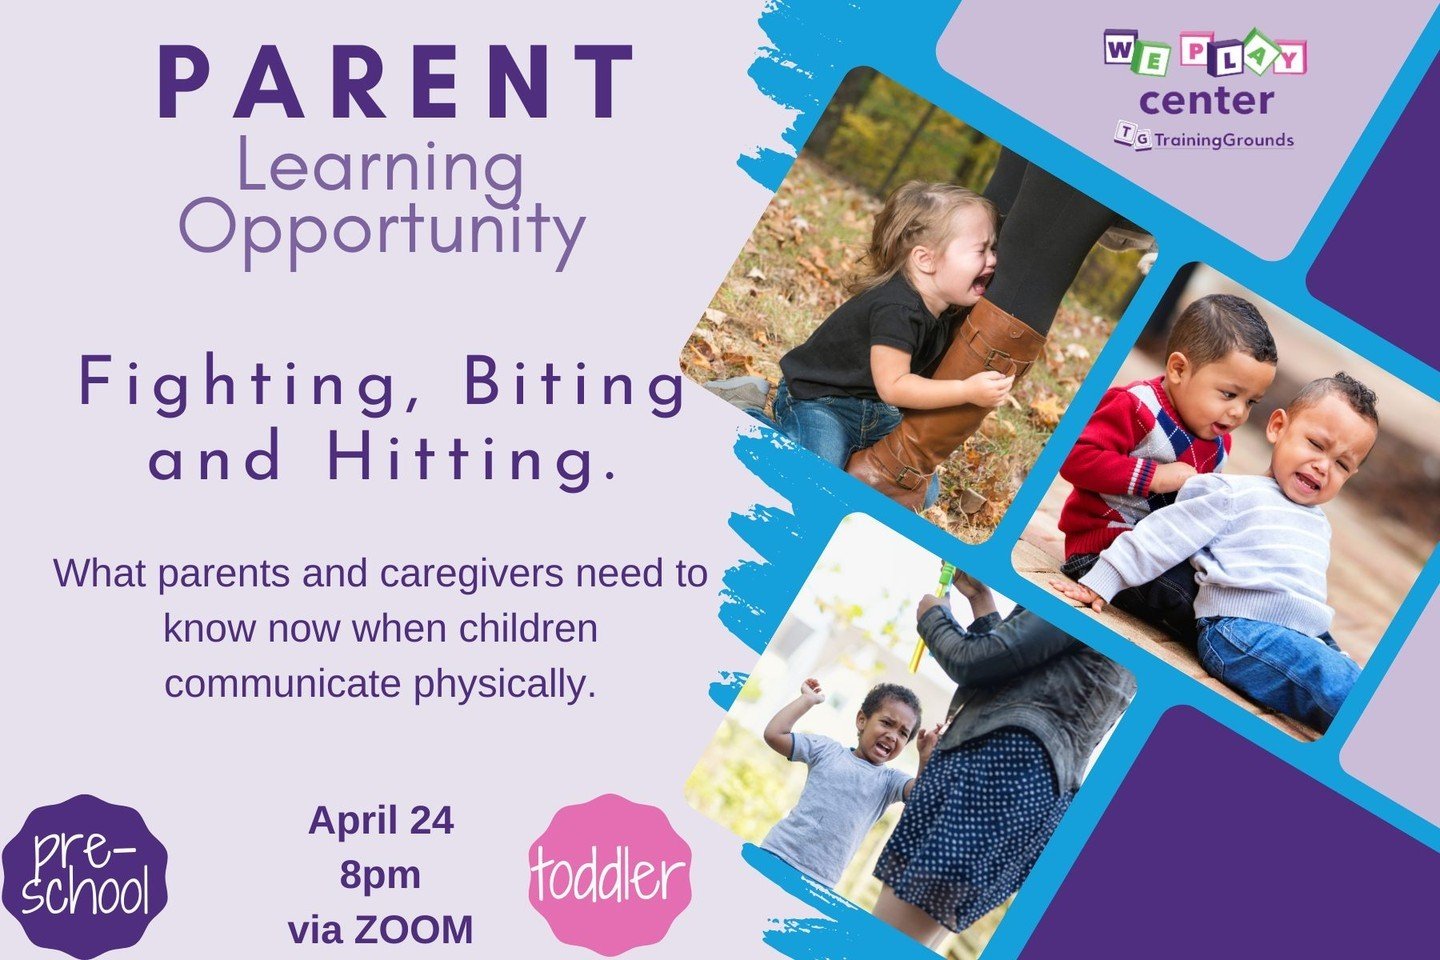 Join us Tomorrow for a fantastic Parent Learning Opportunity!

Exploring the reasons behind toddler hitting and biting unveils valuable insights into their emotions, communication, and developmental needs.

Register now by clicking the link in the bi